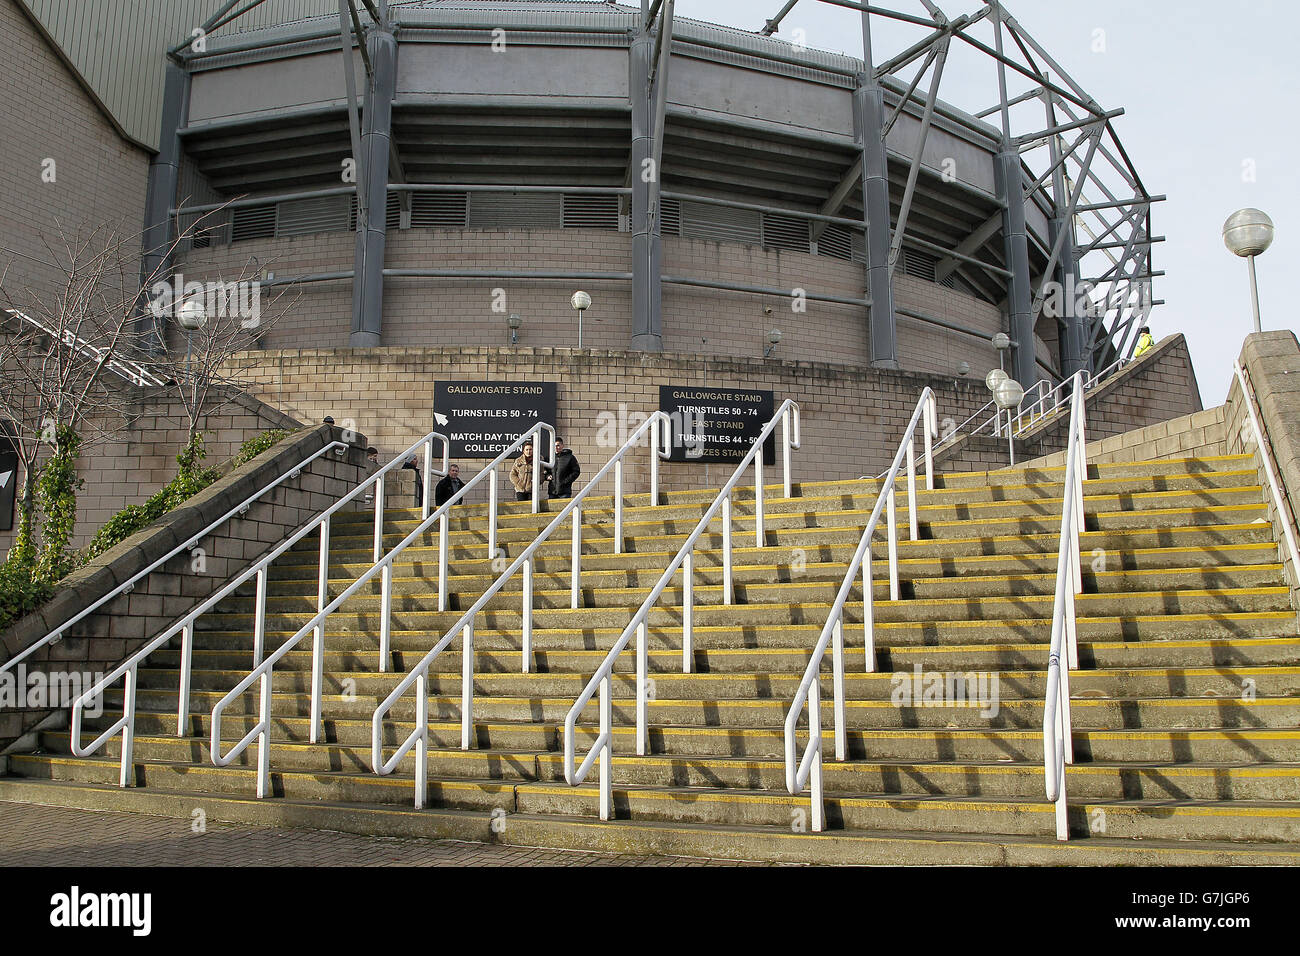 Soccer - Barclays Premier League - Newcastle United v Burnley - St James' Park. A general view of stairs at St James' Park Stock Photo